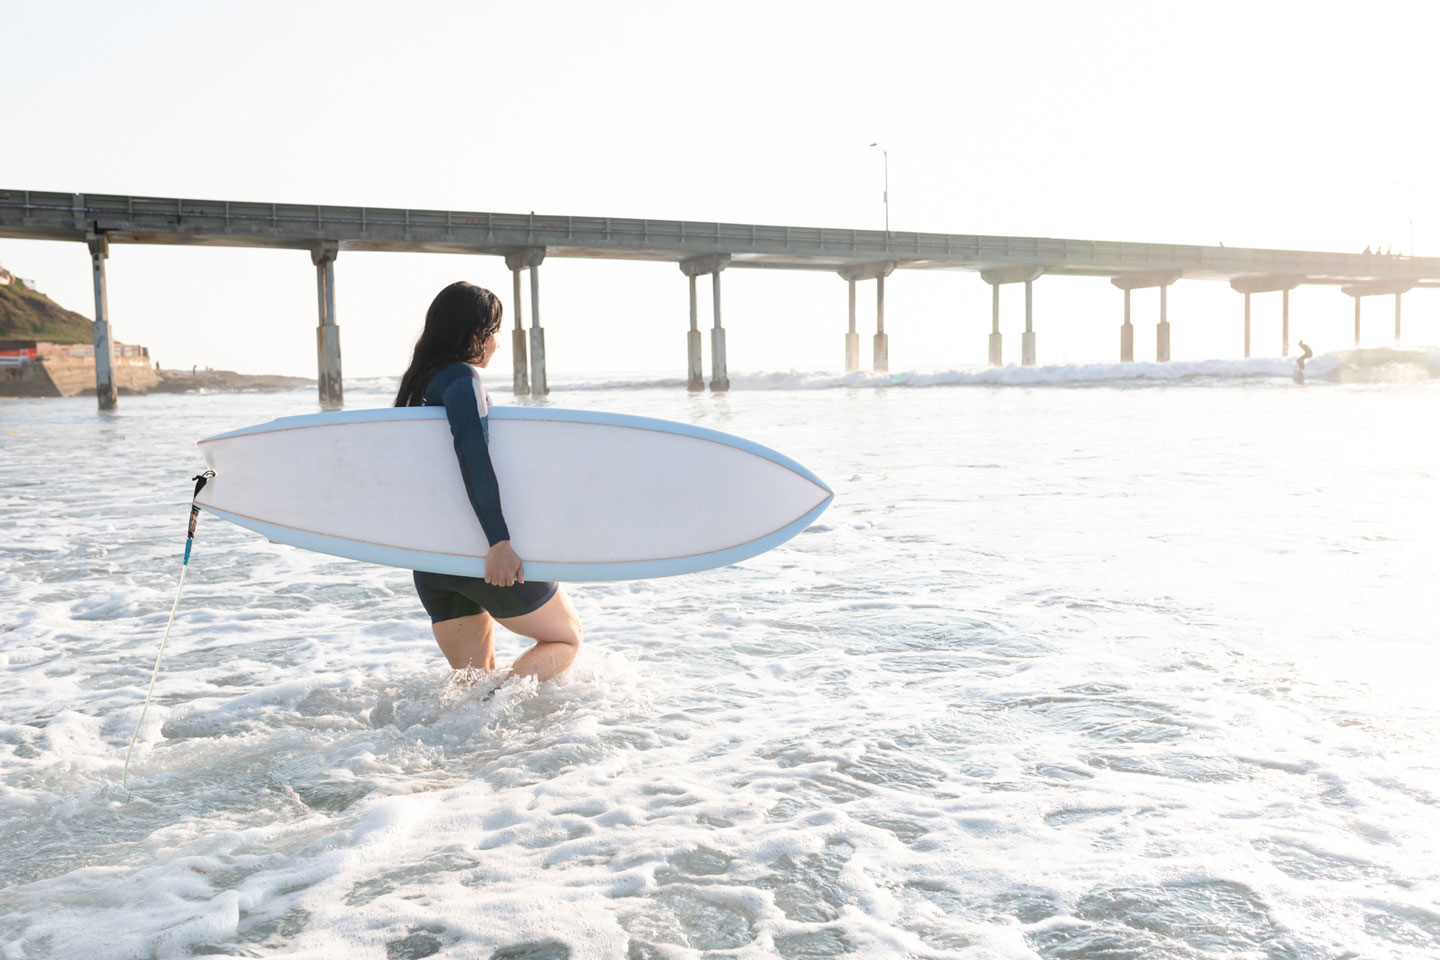 female surfer wading out into waves with surfboard under arm, with pier in the background